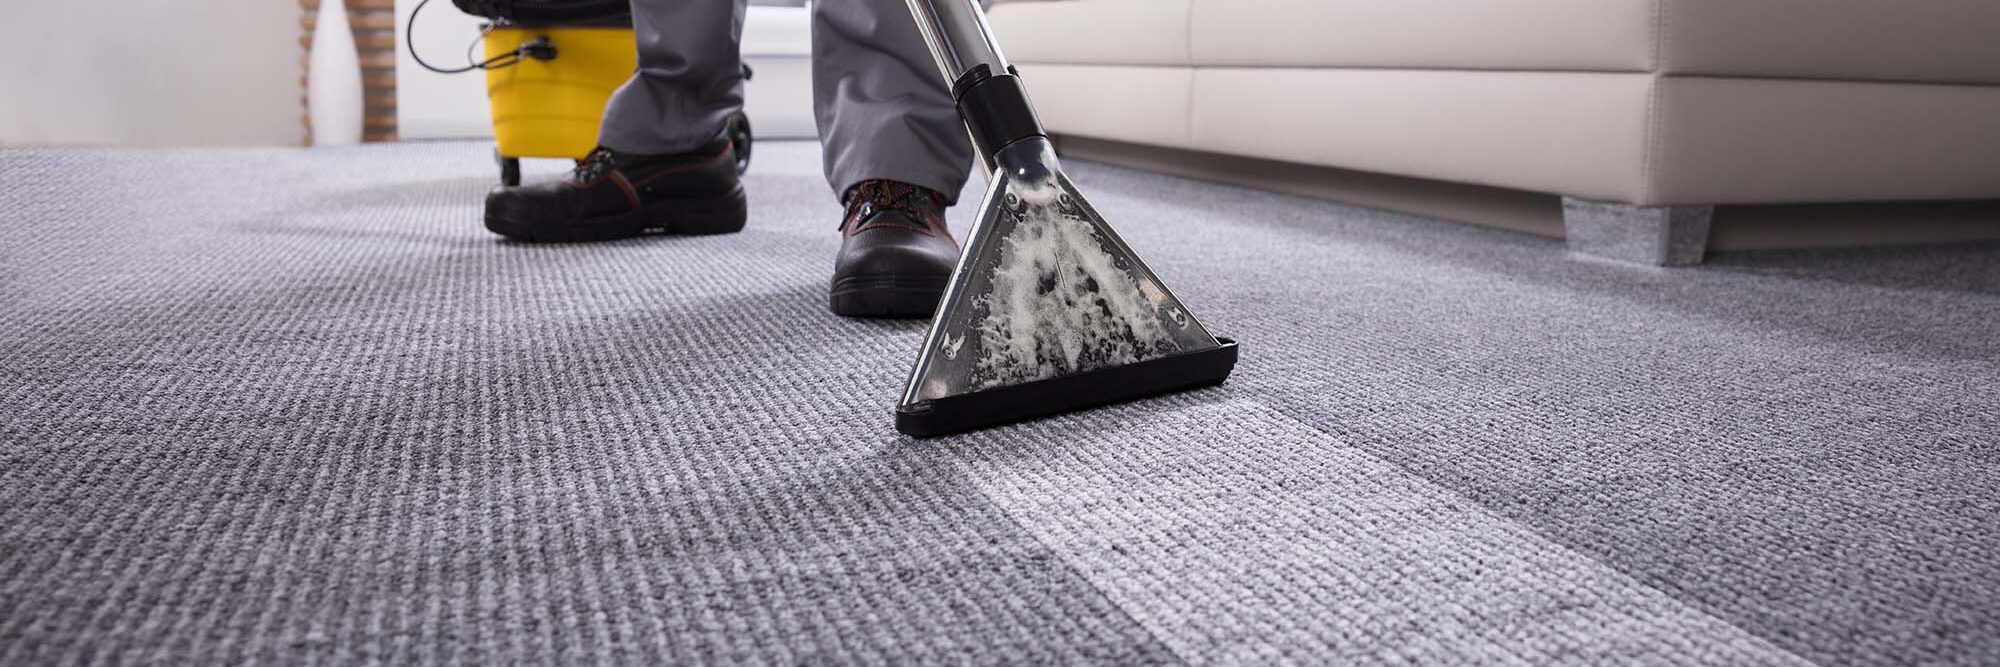 Commercial Carpet Cleaning Capital Service Group Charleston SC